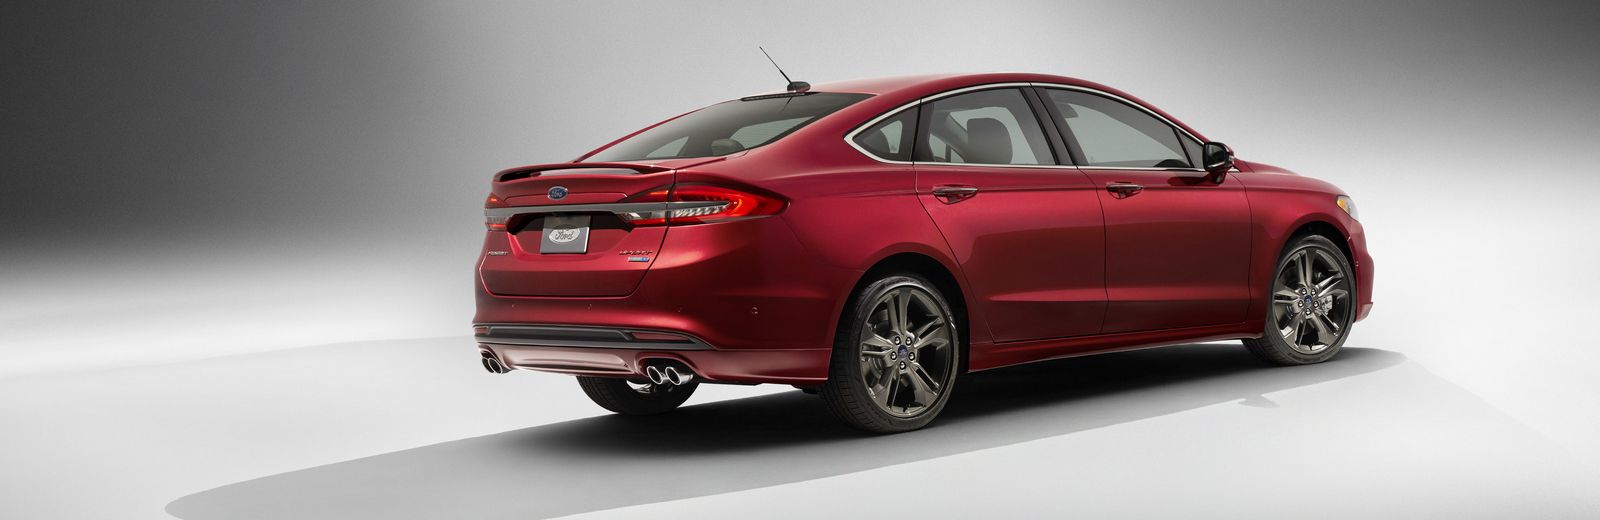 2019 Ford Fusion 4